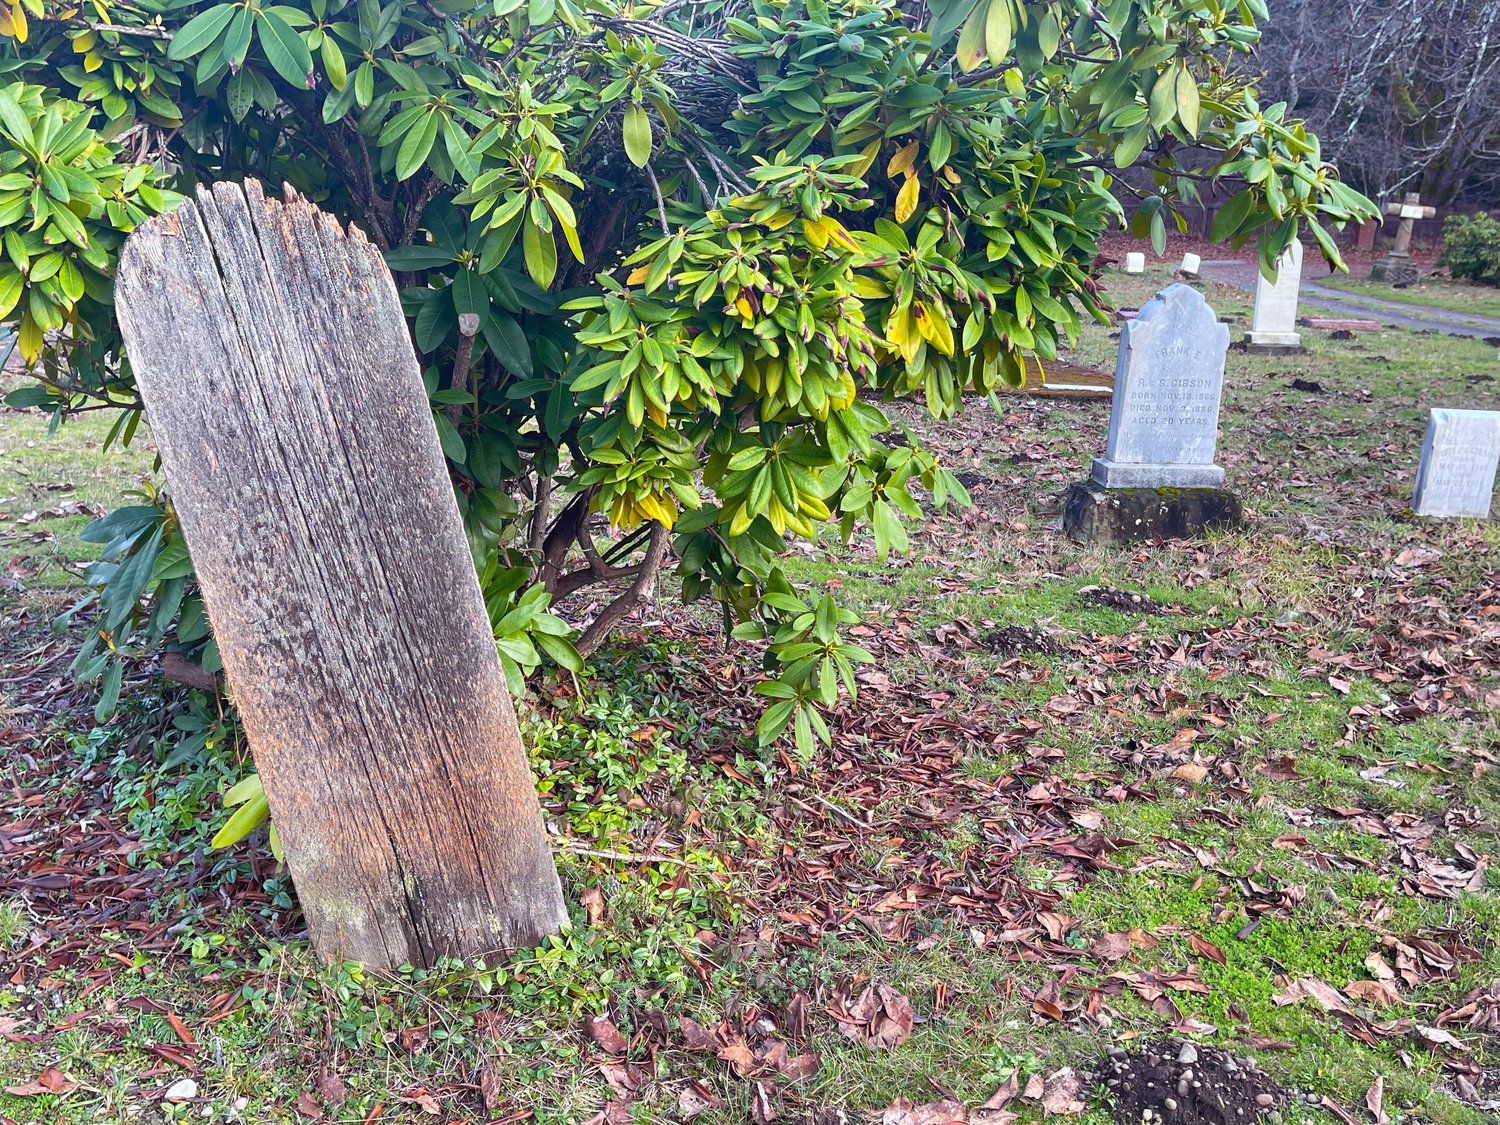 A wooden gravemarker is seen at Tenino's Forest Grove Cemetery.